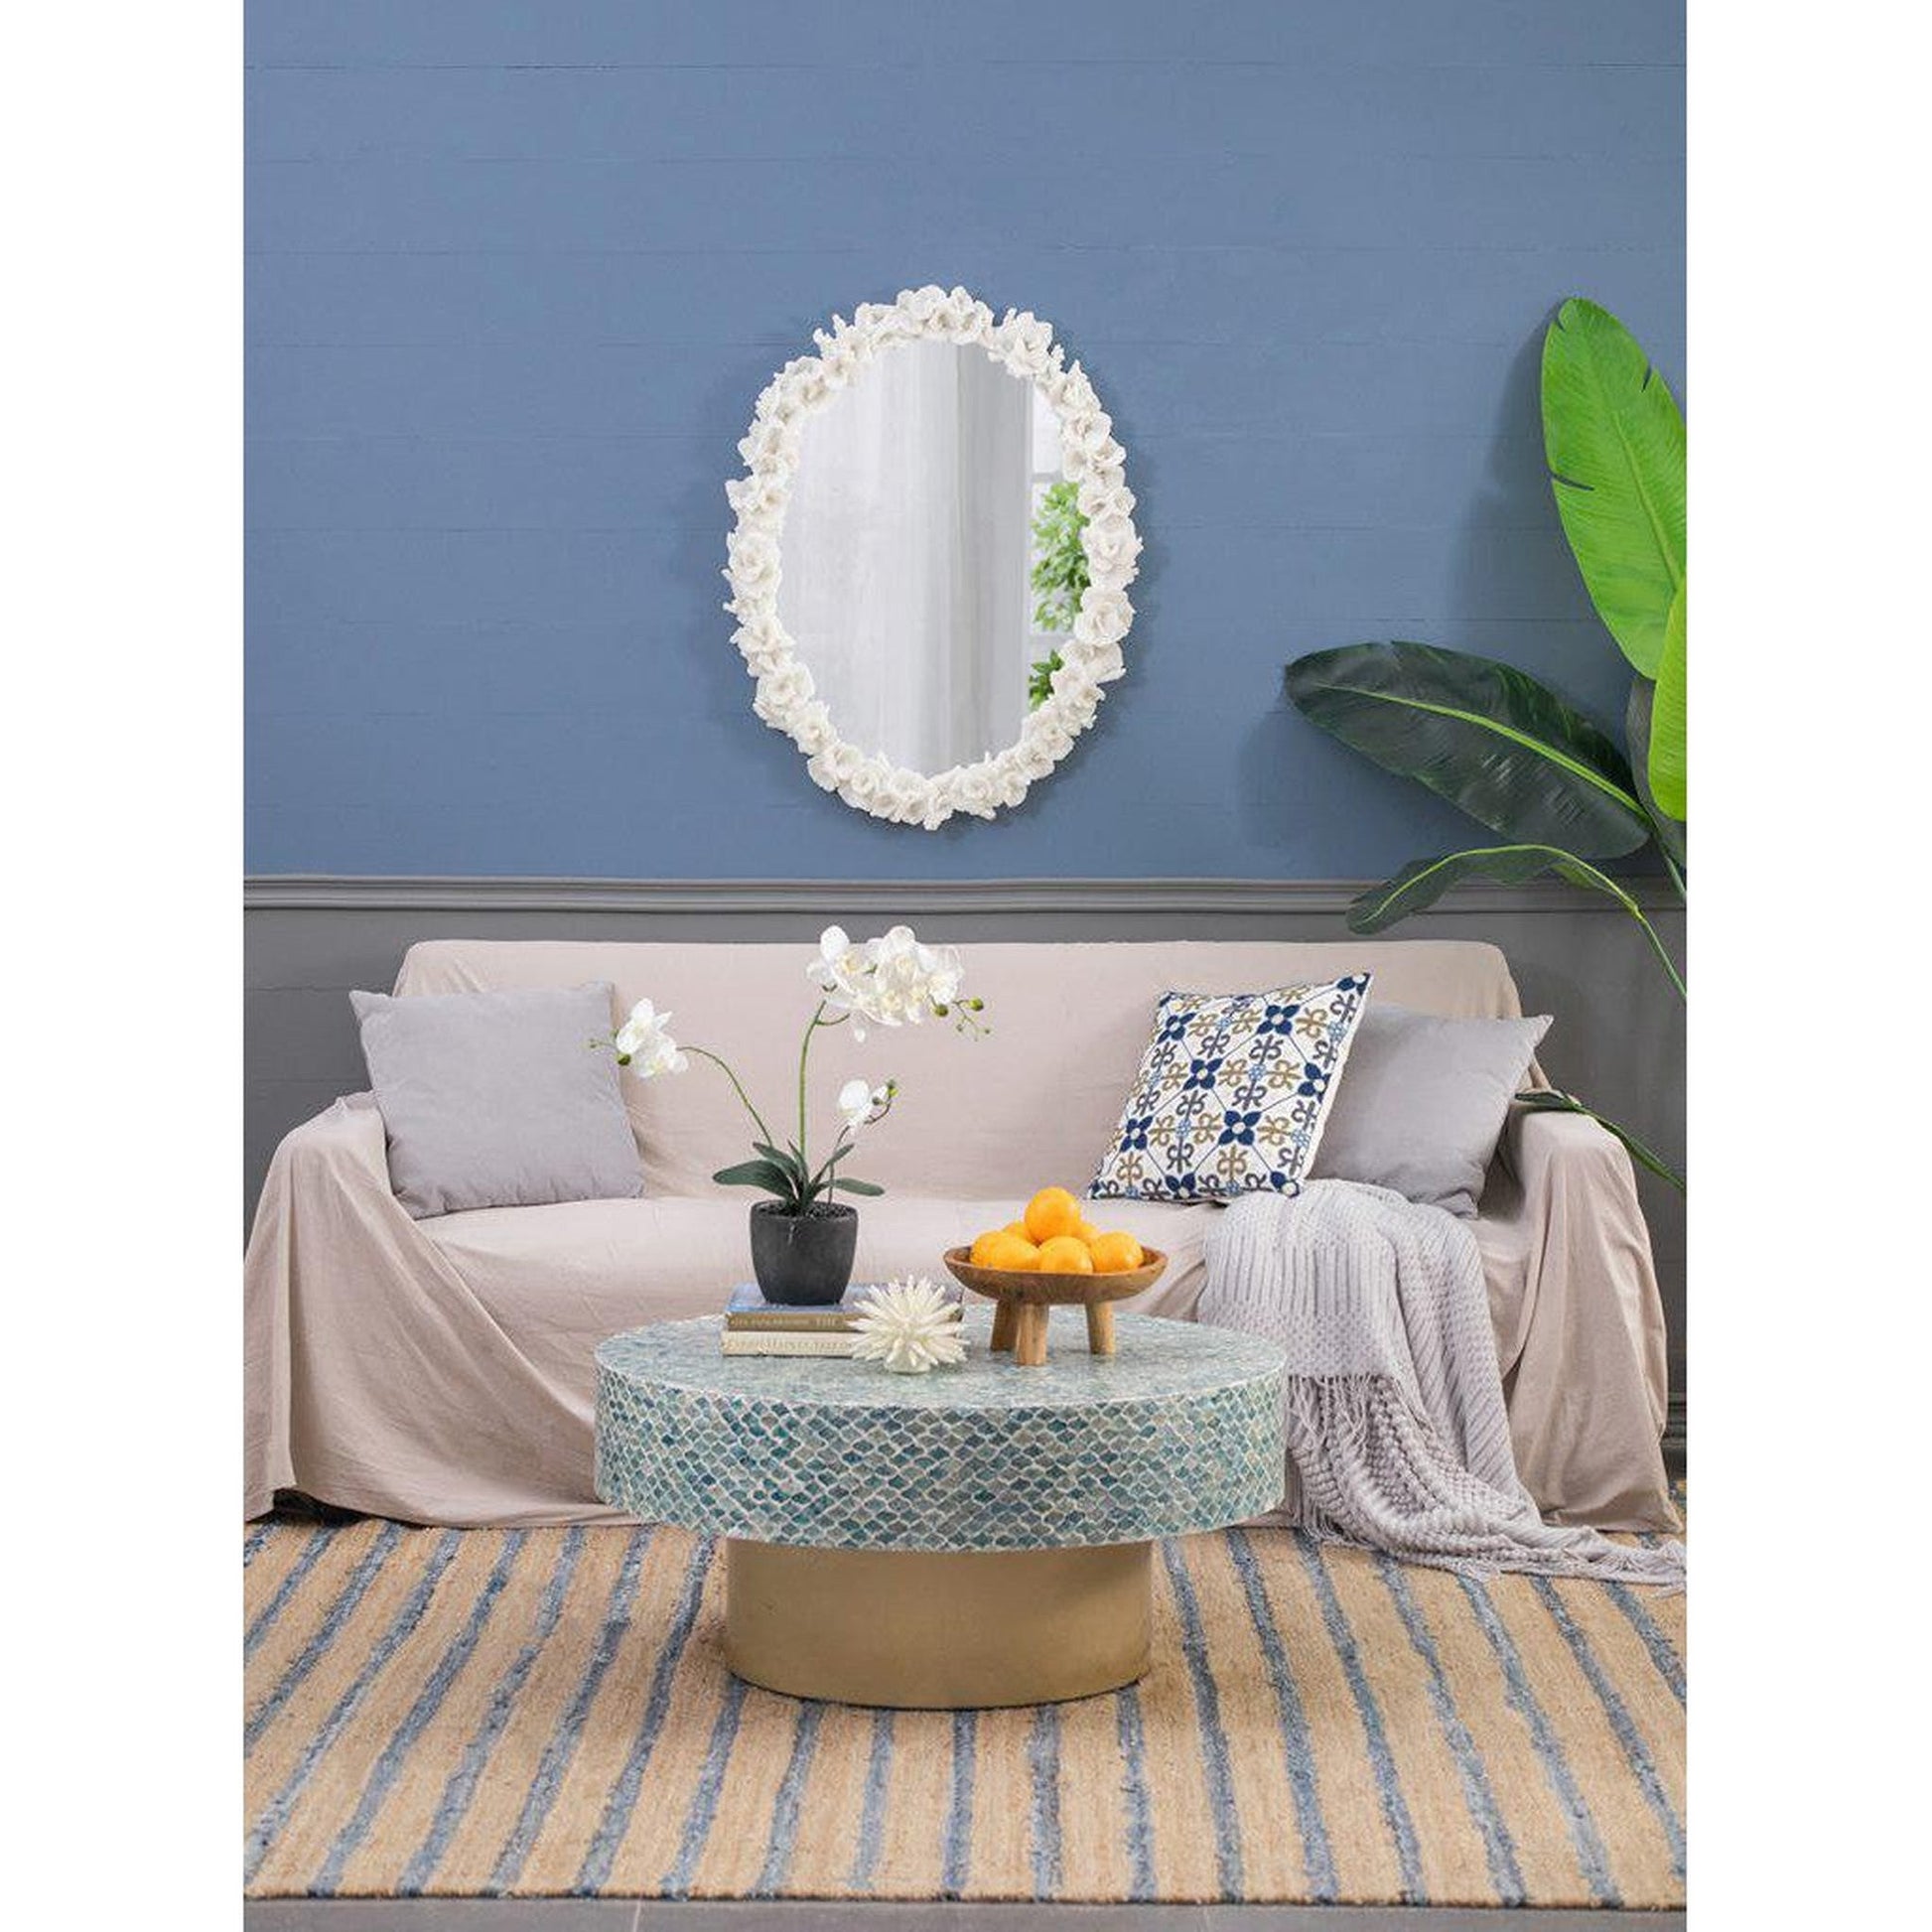 A&B Home Shelby 28" x 35" Bundle of 6 Round White Clear Resin Faux Coral Frame Wall-Mounted Mirror